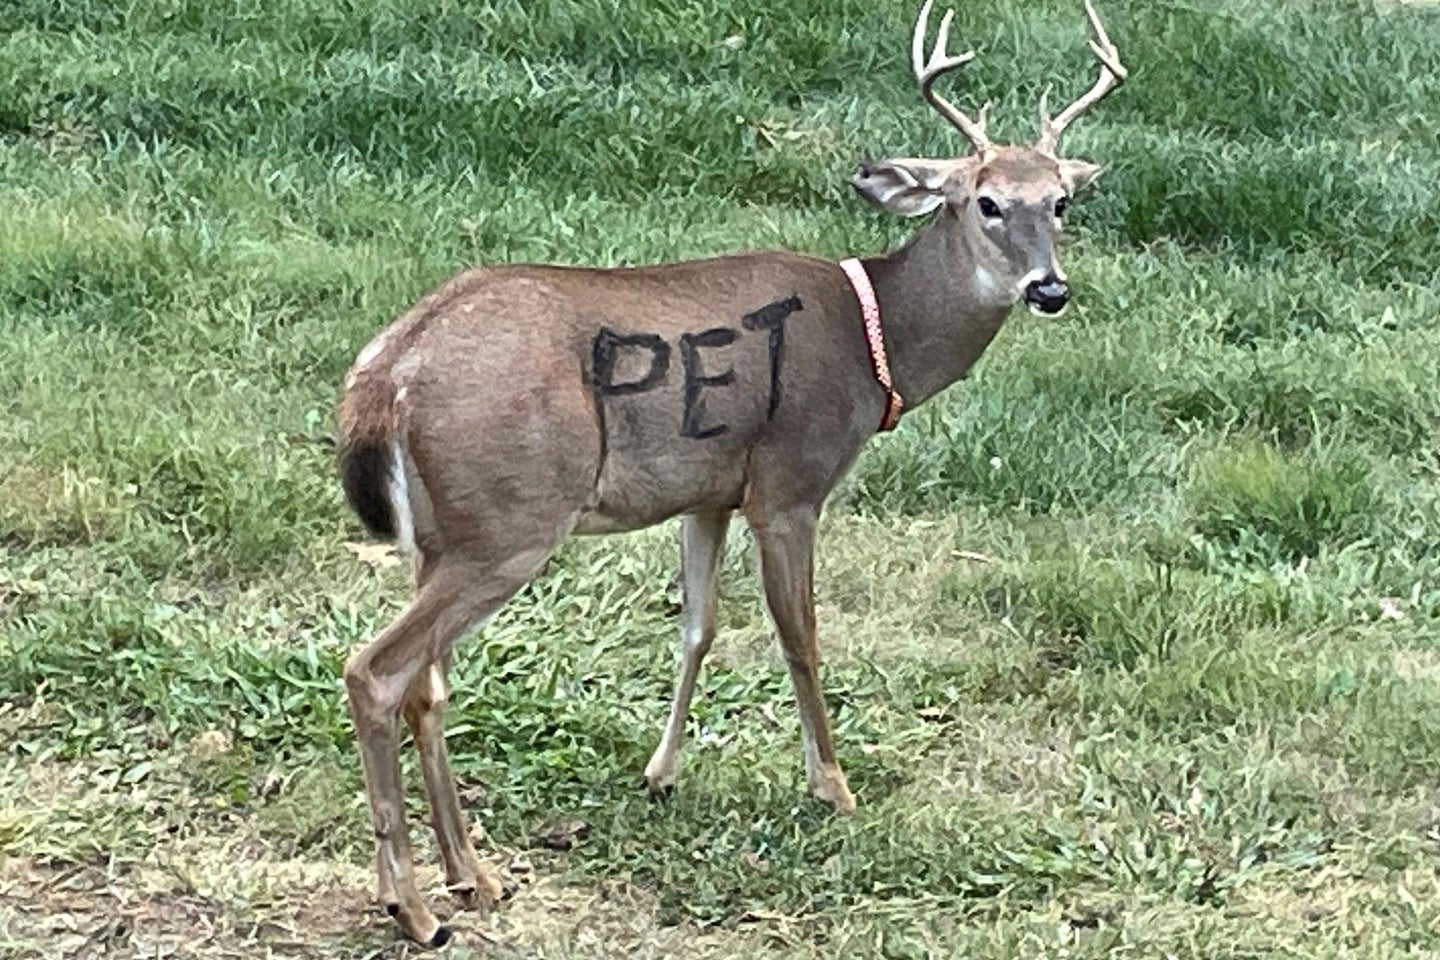 Conservation officials warned against the hazards of keeping wild whitetail as pets.